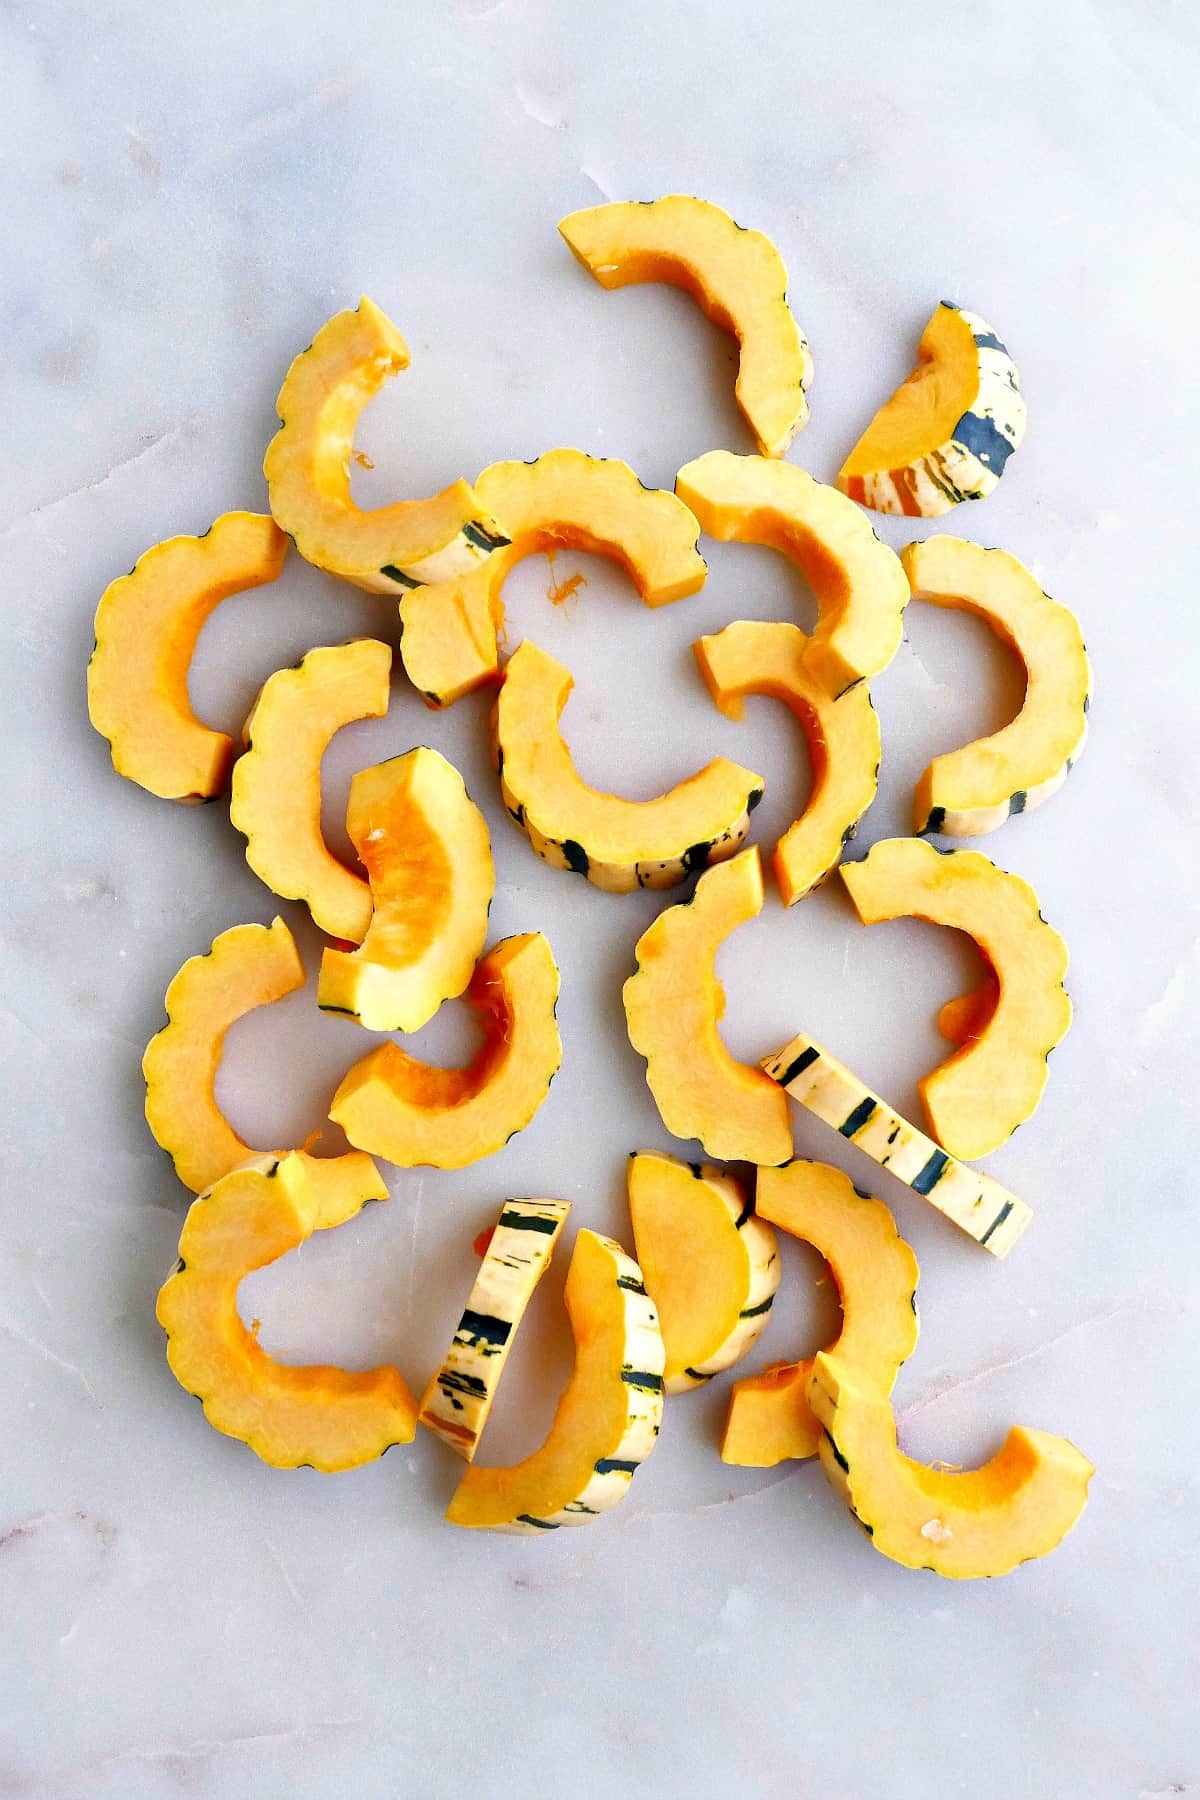 delicata squash cut into half-moon shapes spread out on a white counter